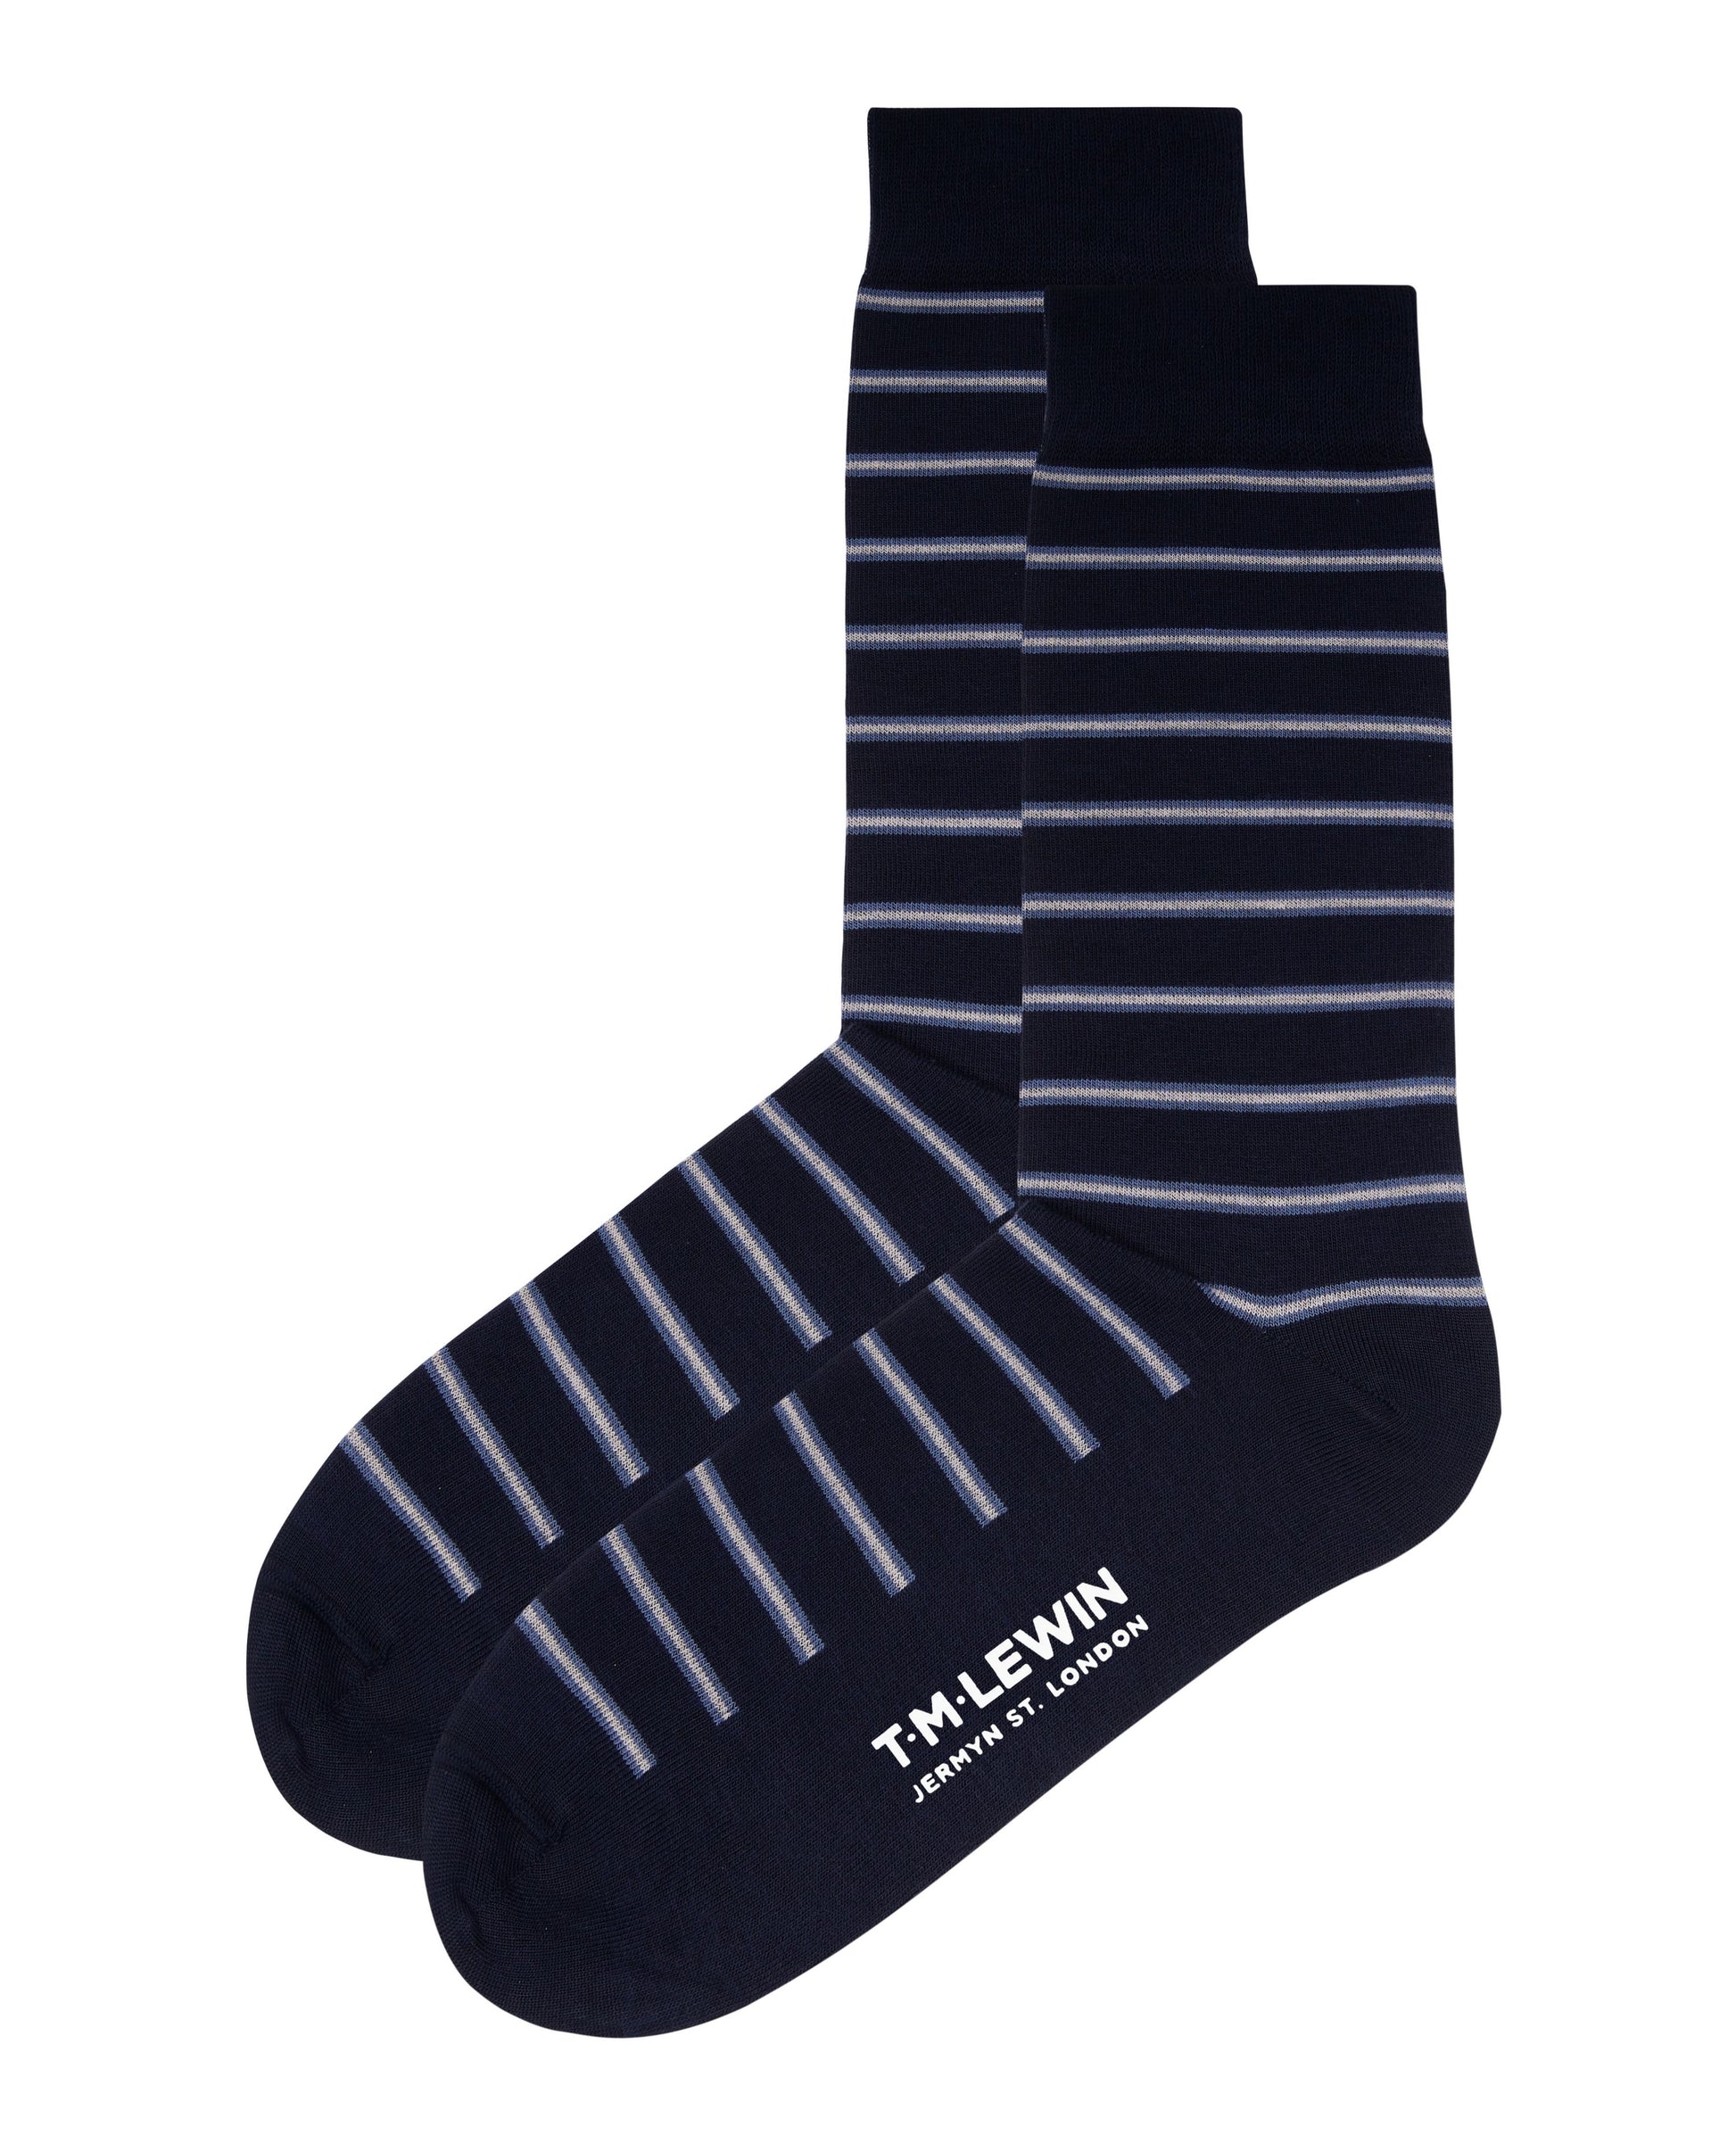 Image 5 of Navy and Pink 3 Pack Socks Box Set